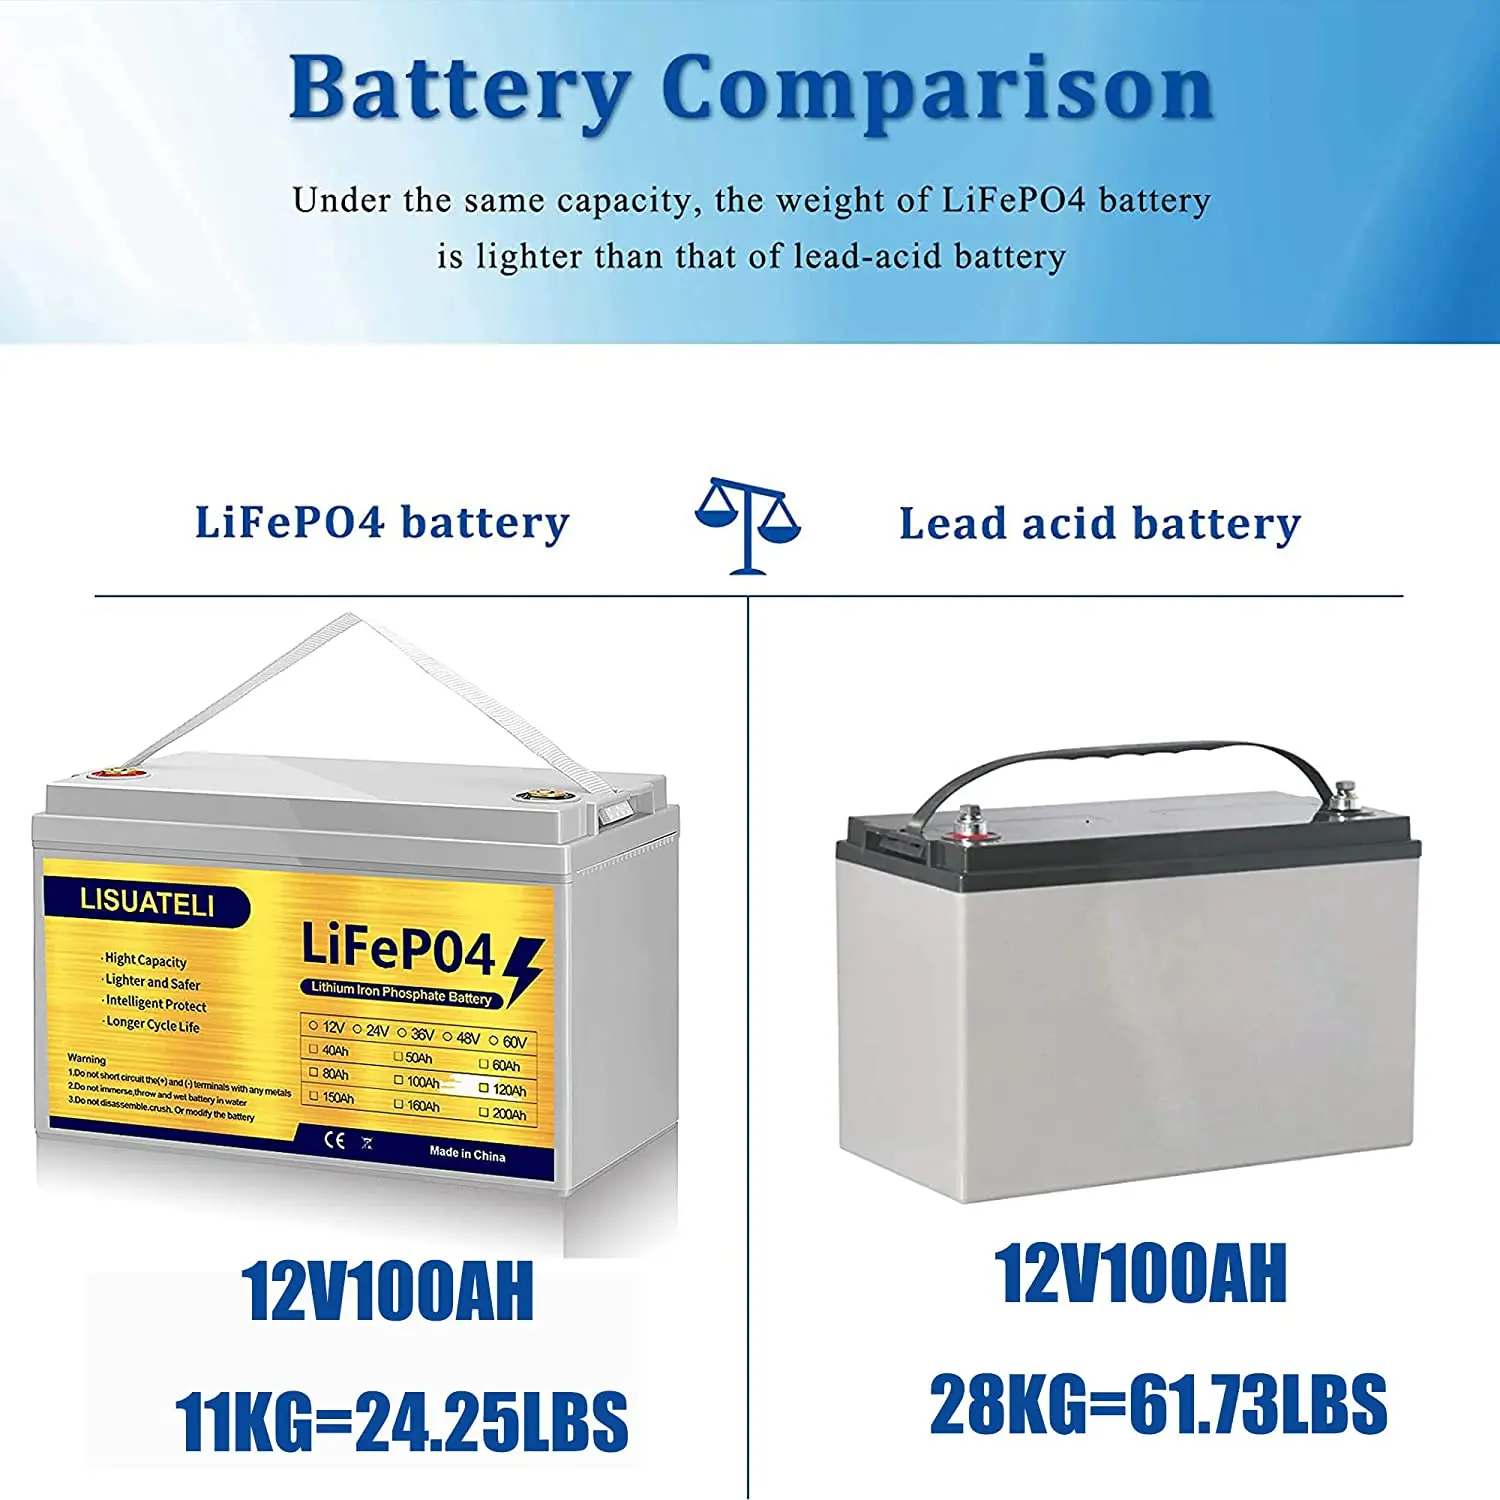 OCELL 12V 6Ah Lithium Iron Phosphate Battery, Rechargeable LiFePo4 Battery  with 10 Years Lifetime, Low Self-Discharge for Kid Scooters, Security